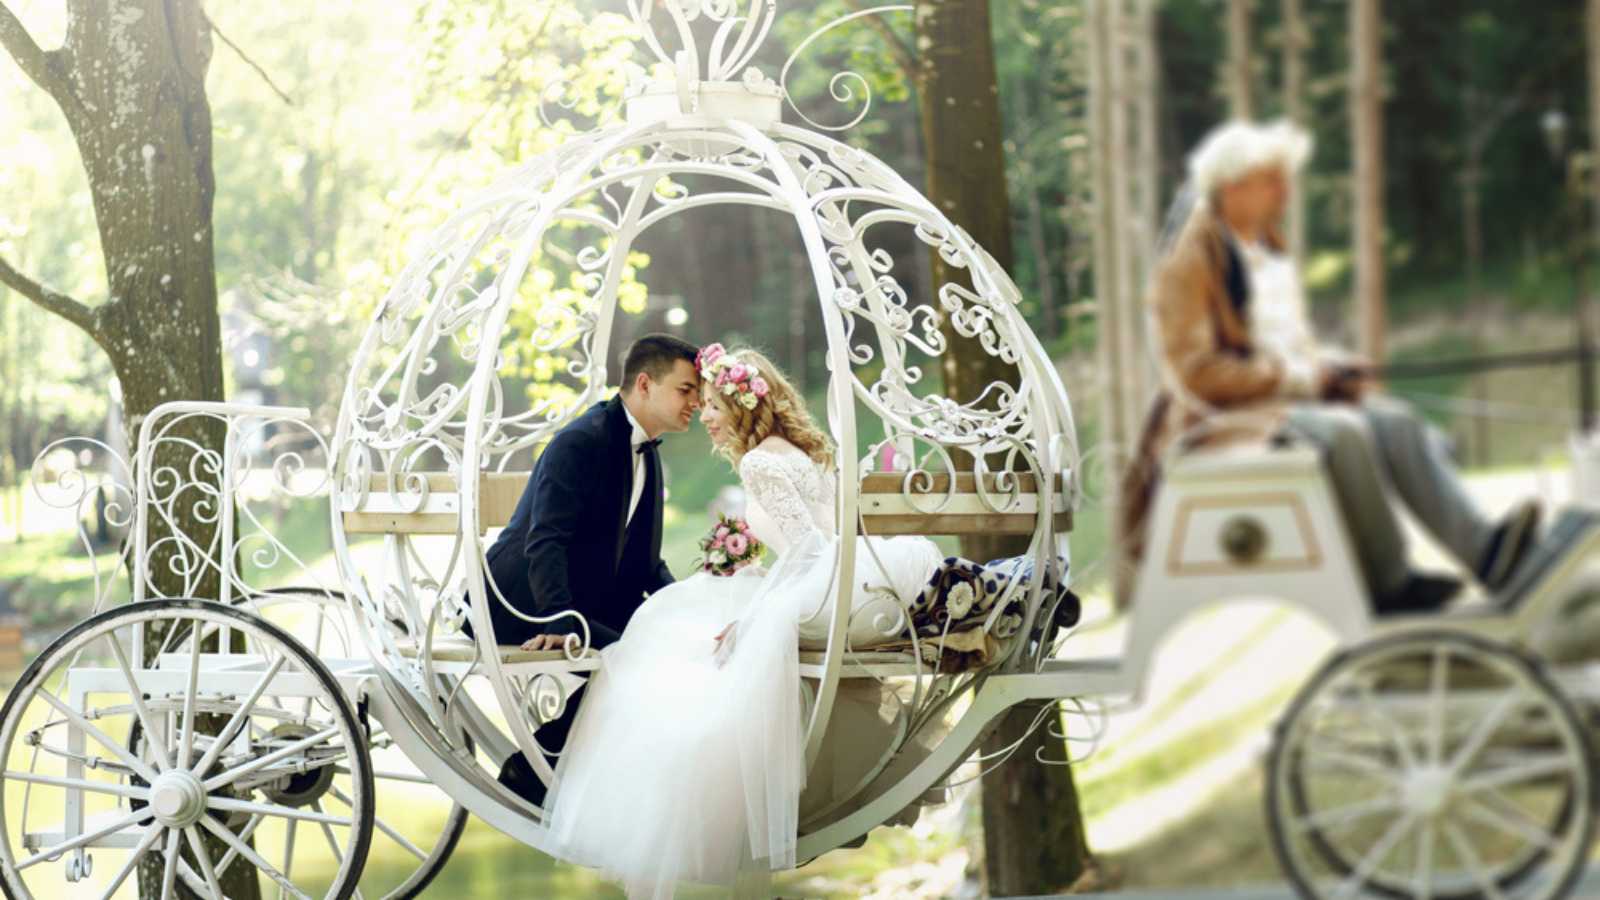 Handsome groom kissing blonde beautiful bride in magical fairy tale carriage in sunlit park